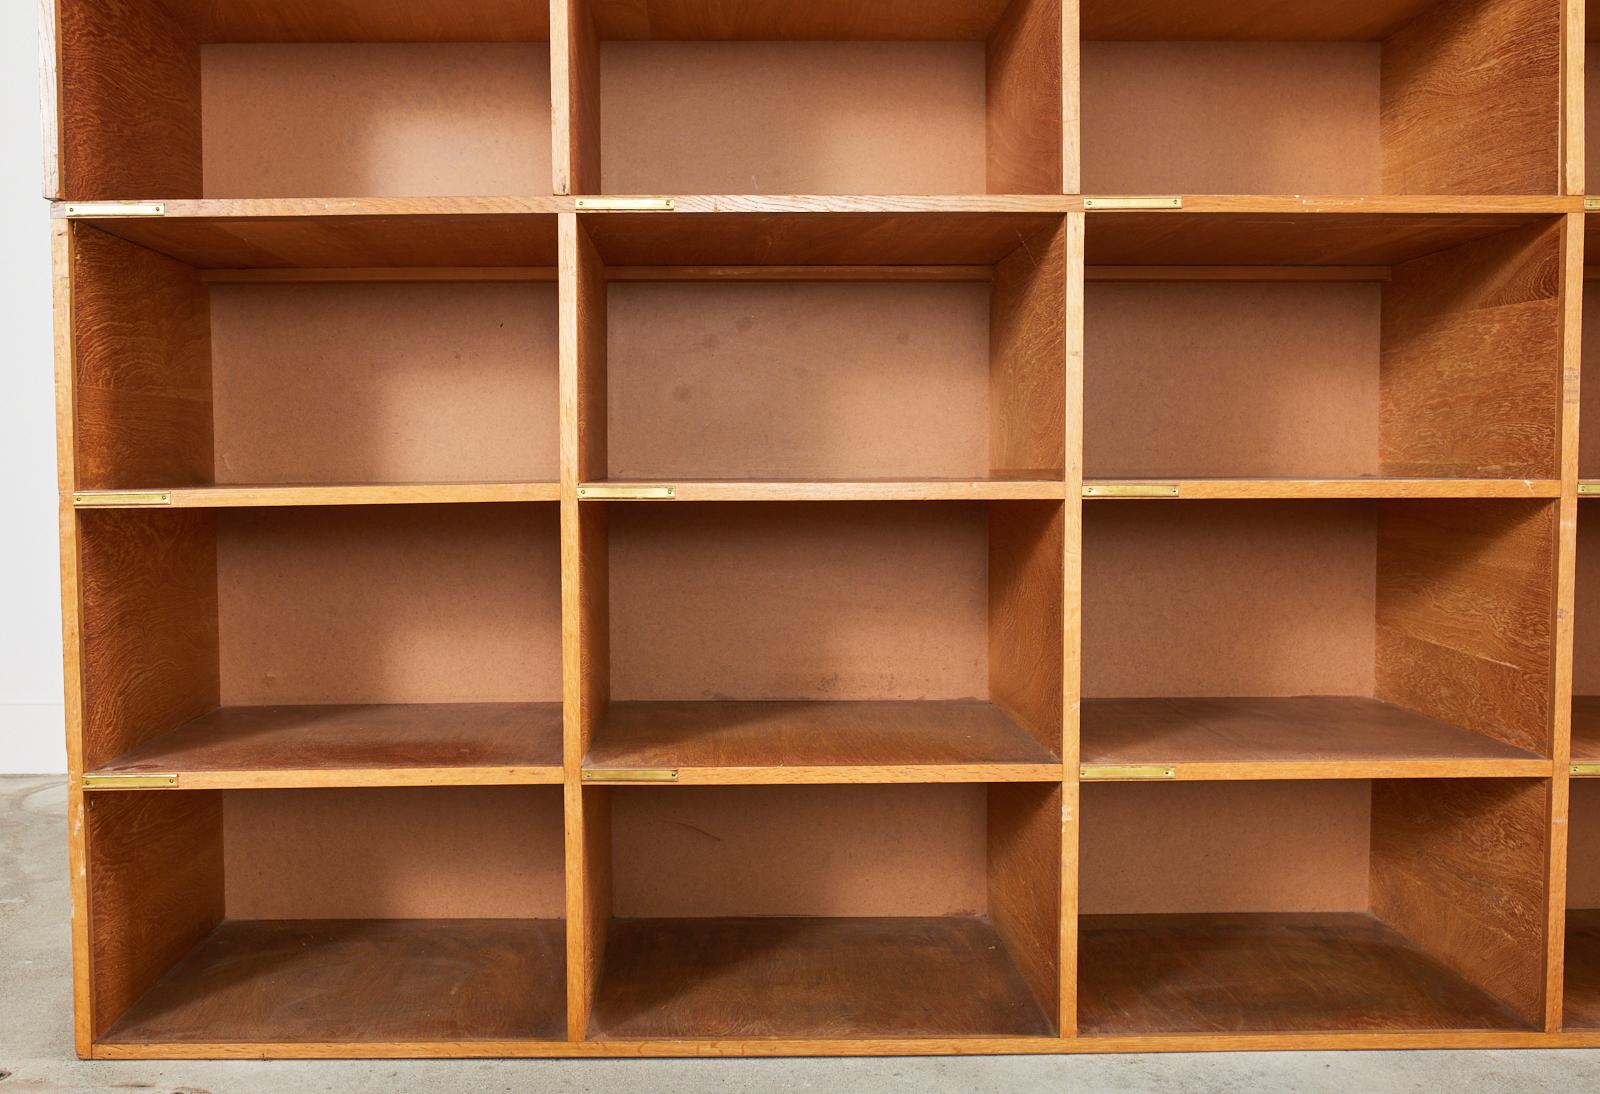 Hand-Crafted English Oak Pigeon Hole Haberdashery Cabinet Shelves or Bookcase For Sale